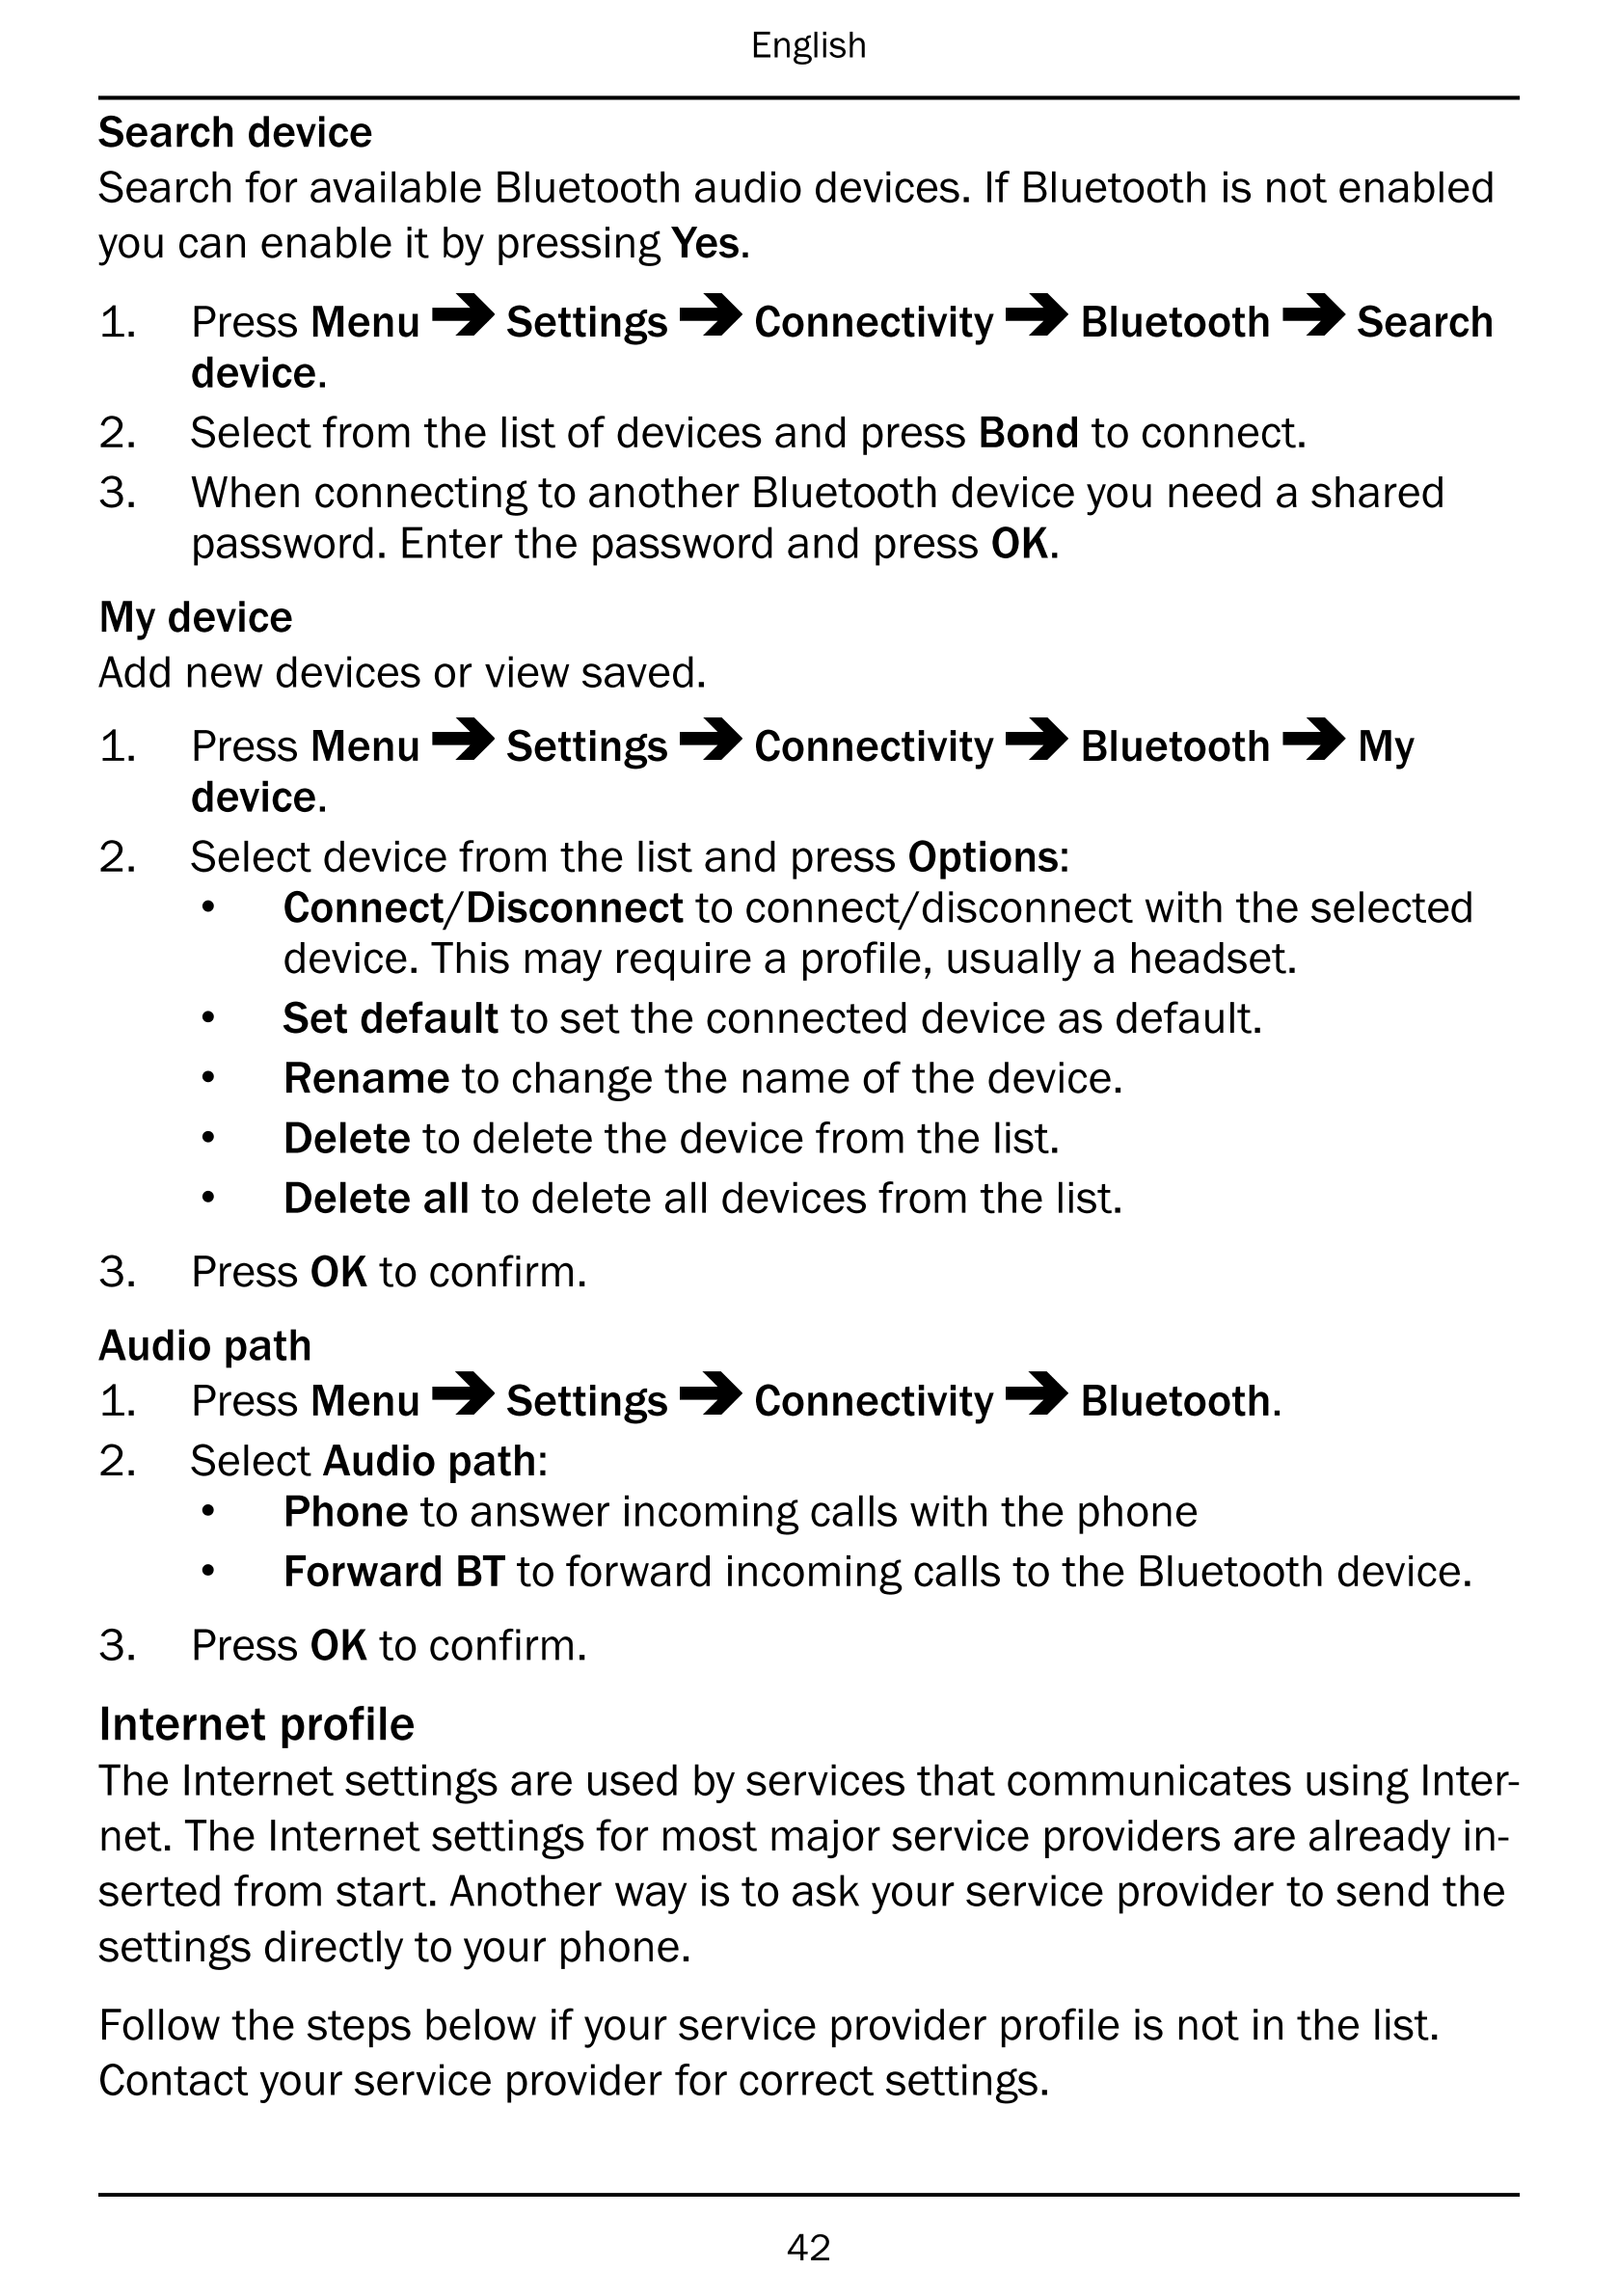 English
Search device
Search for available Bluetooth audio devices. If Bluetooth is not enabled
you can enable it by pressing Ye